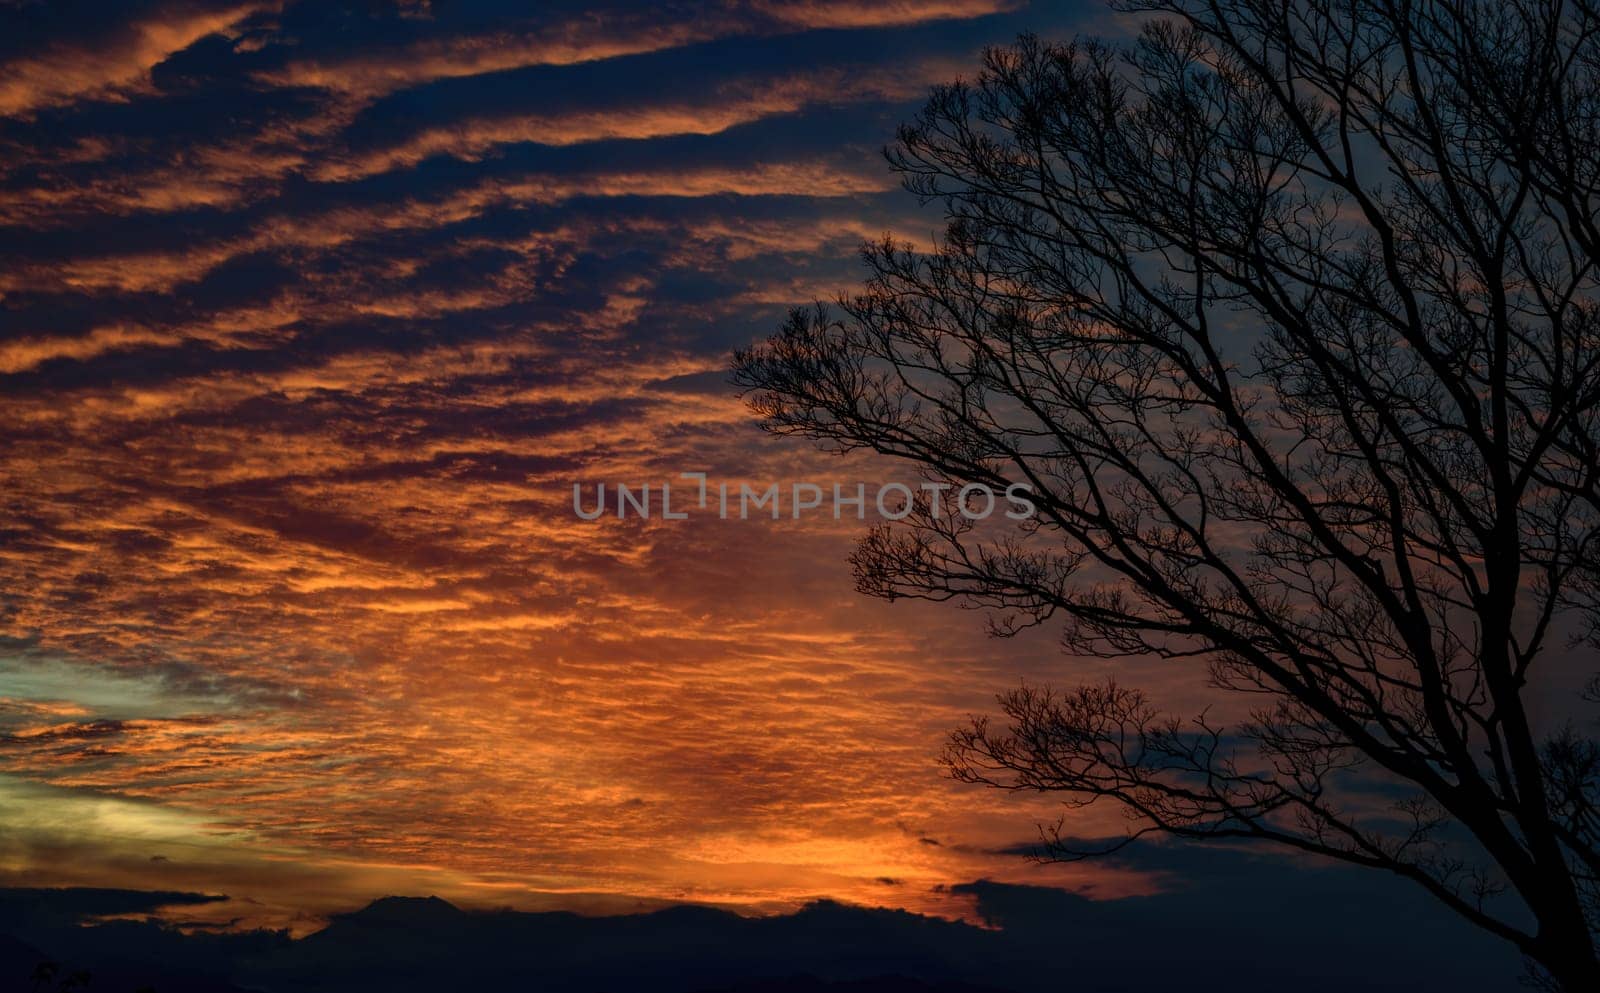 Vibrant sunset sky with orange clouds and silhouette of a bare tree.